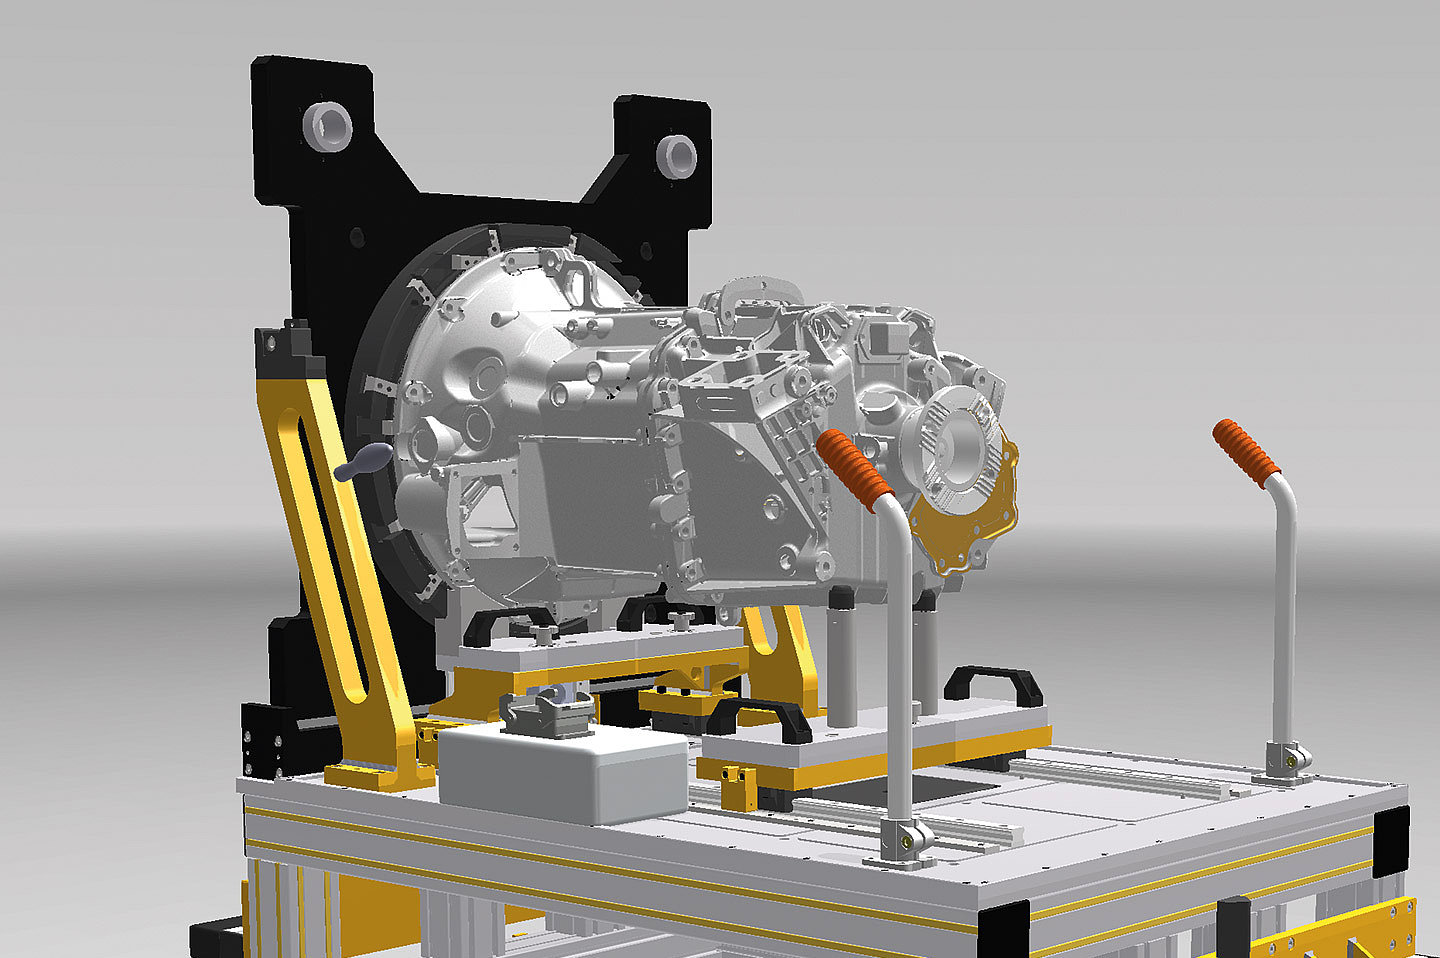 Eol function test stand from Blum-Novotest for testing heavy truck transmissions